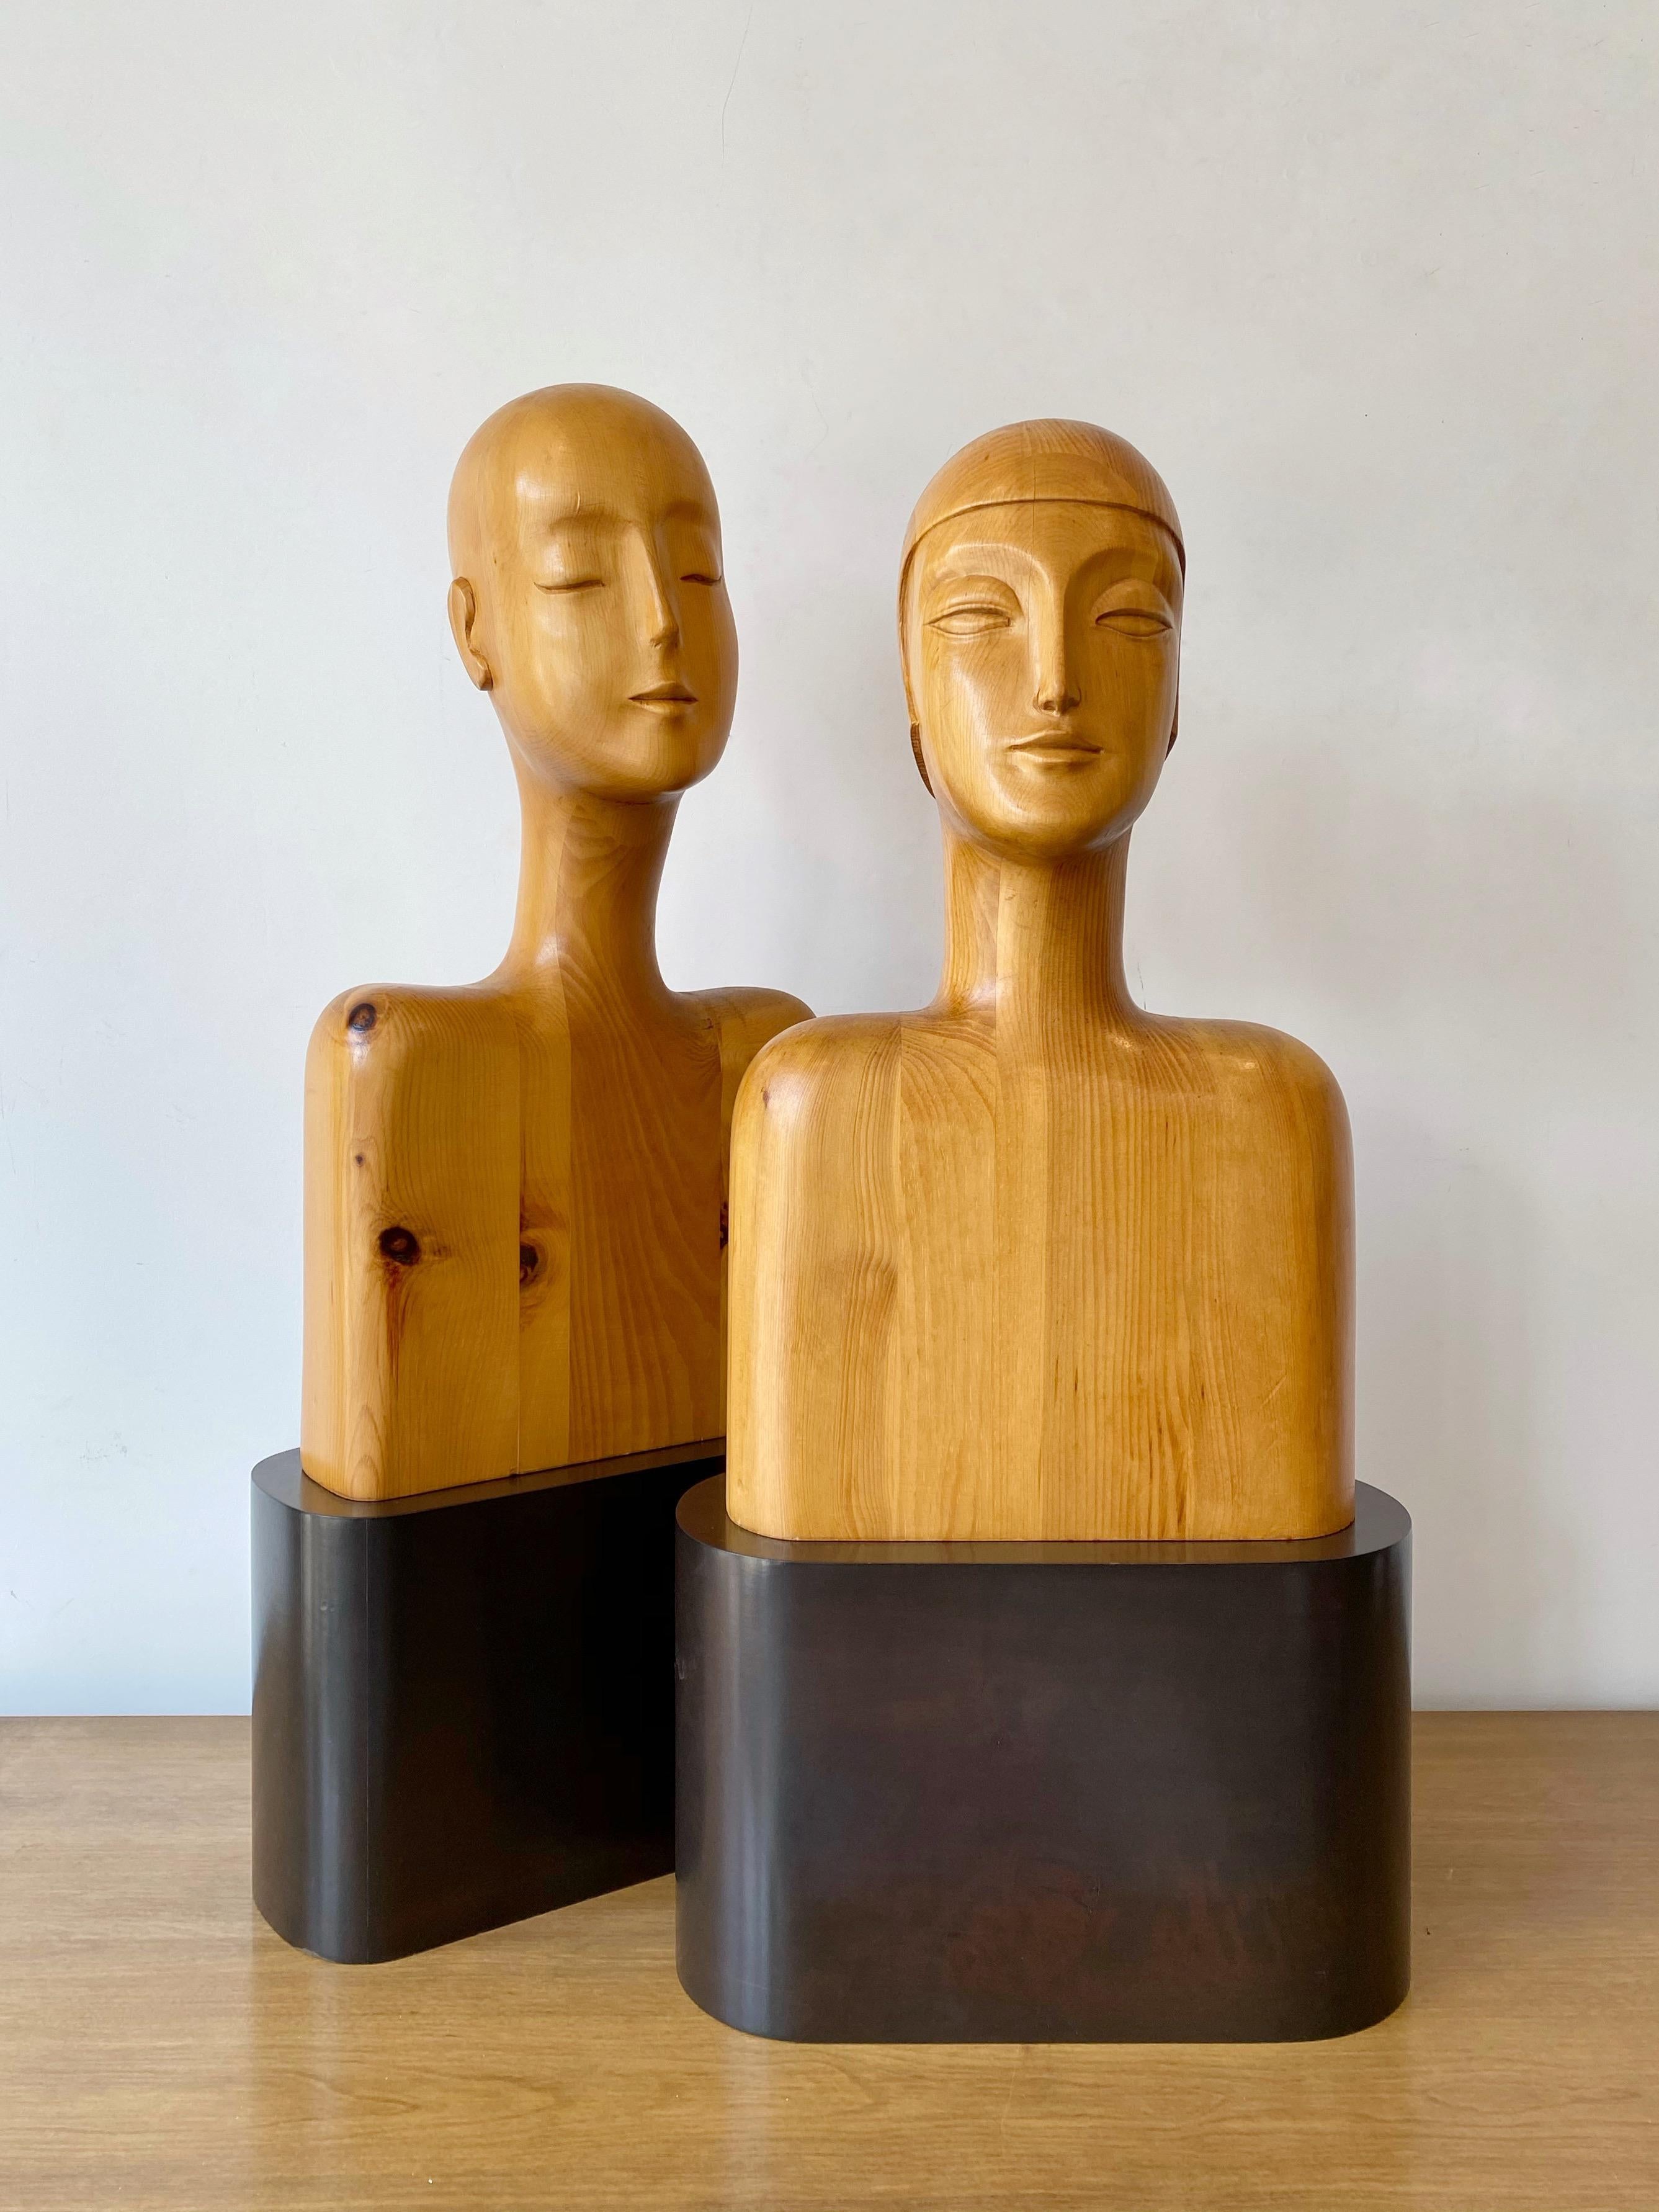 Fabulous Art Deco style carved pine busts. Male and female forms. Solid wood busts. Wood plinth bases. Busts simply set atop the bases to be separated if desired. No signature found.

Bases (each): 14.5” W x 6” D x 9” H
Bust of woman: 12” W x 8”